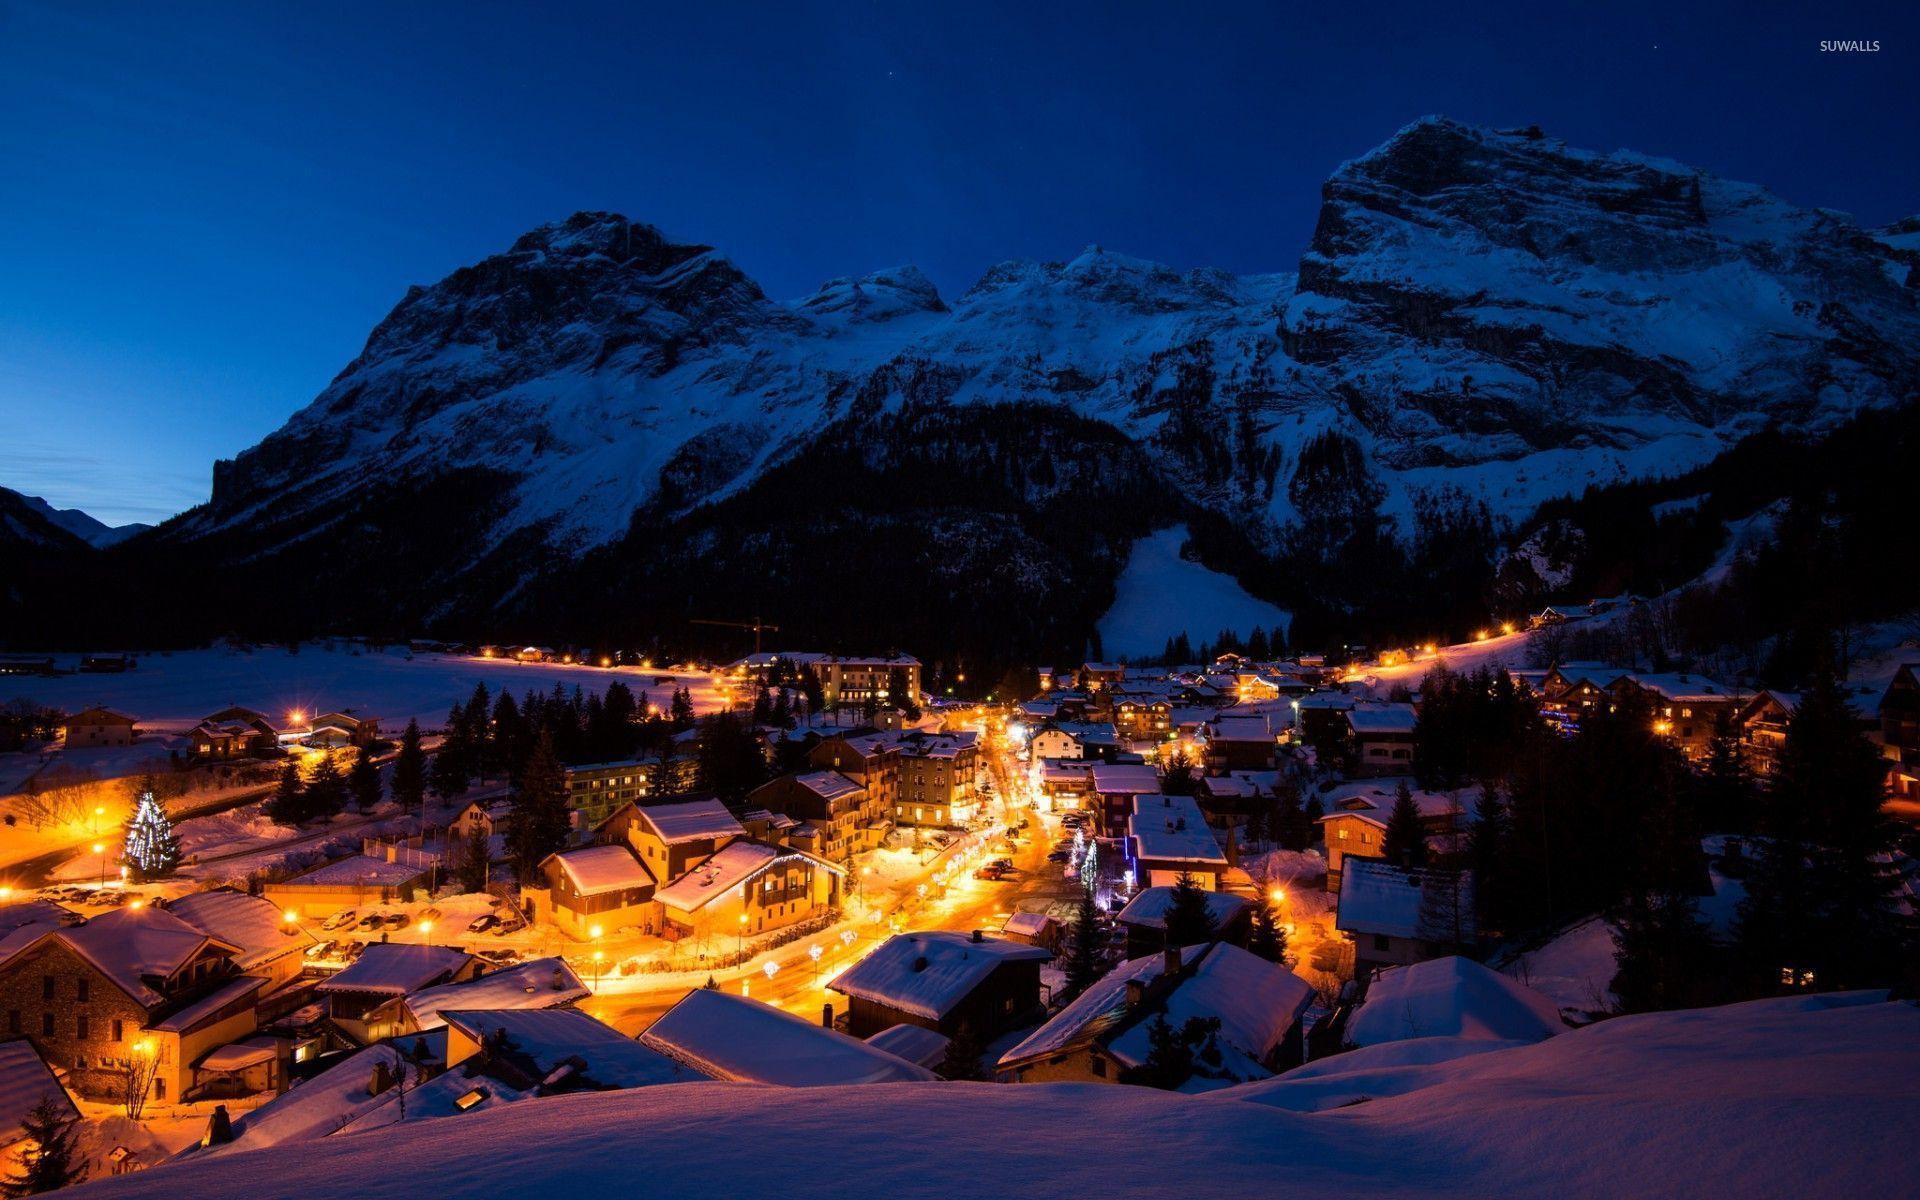 Night lights in the snowy mountain town wallpaper wallpaper